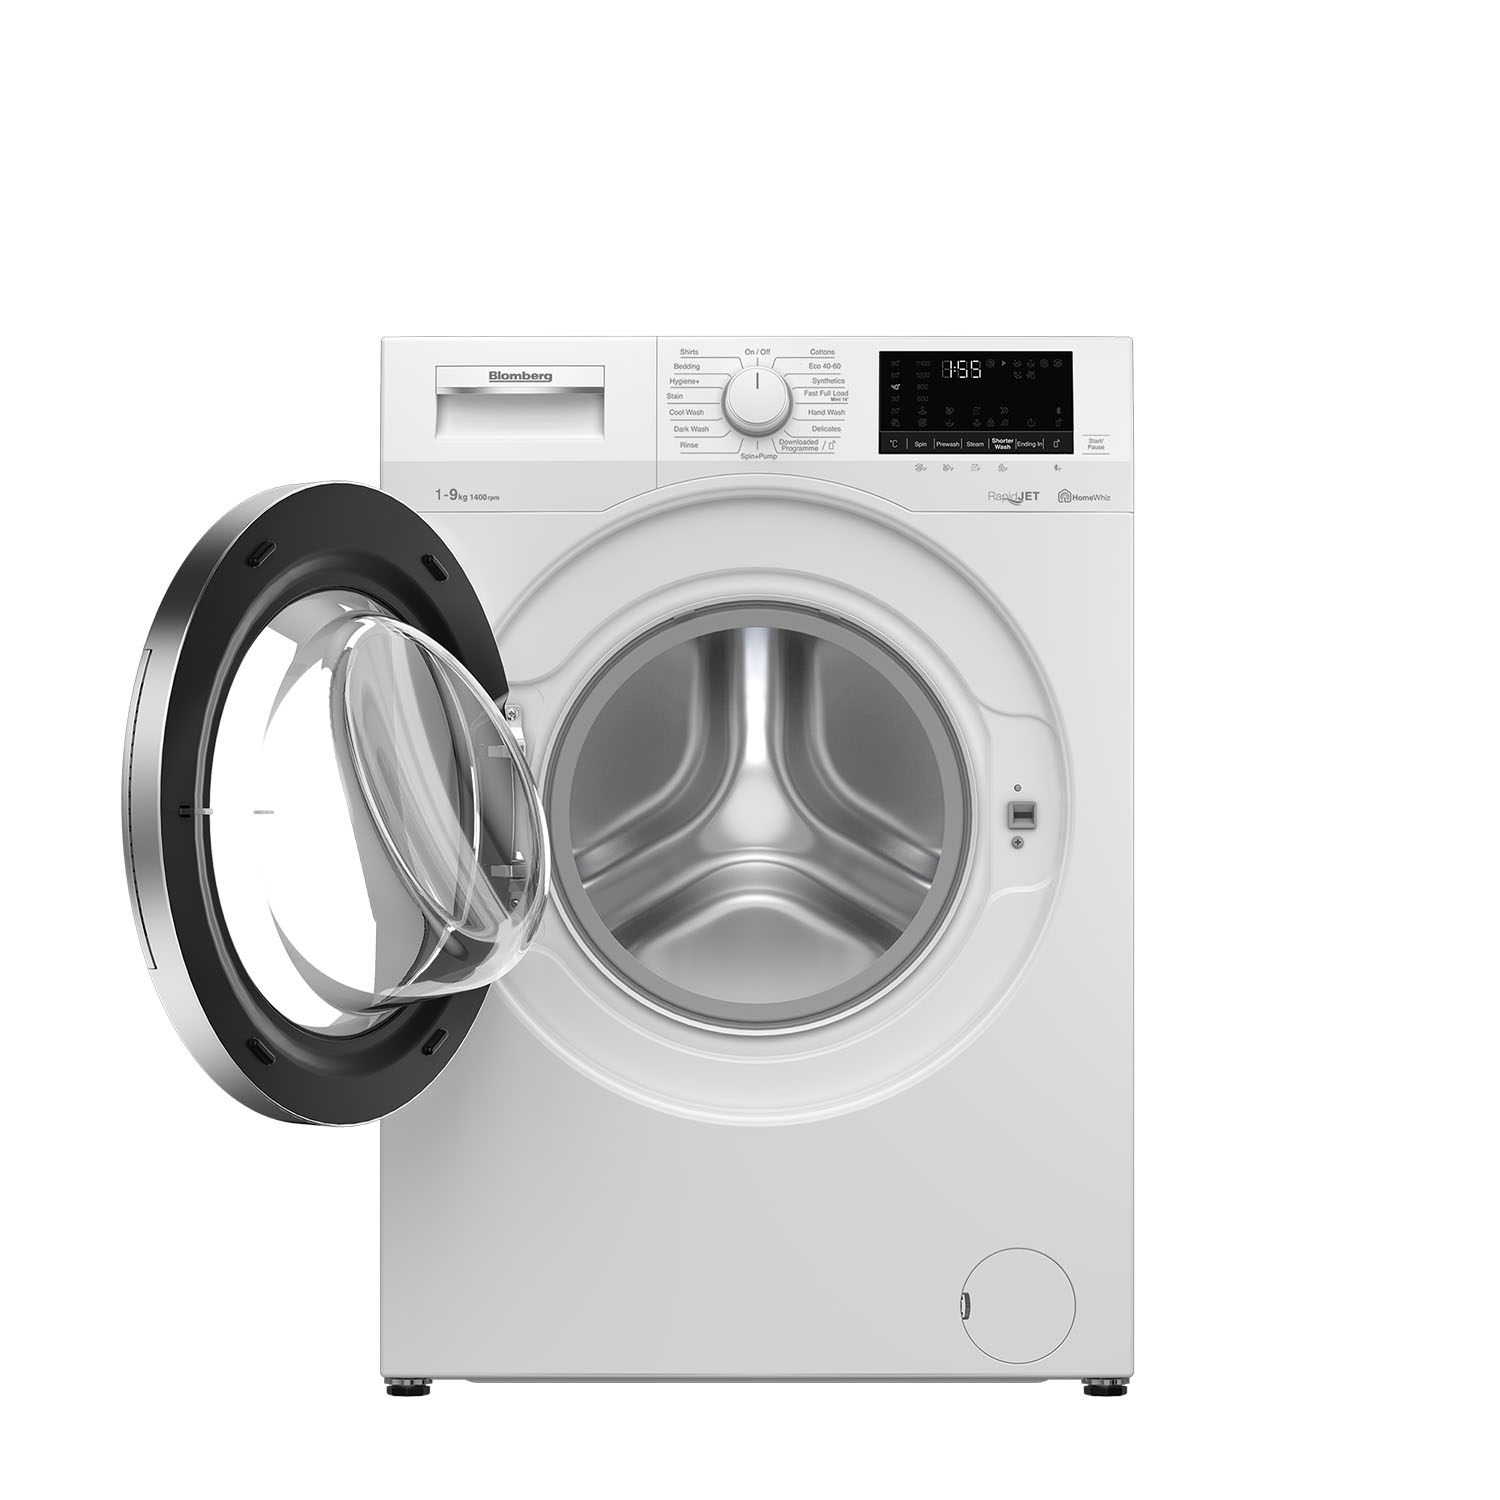 Blomberg LWF194520QW 9kg 1400 Spin Washing Machine with RapidJet technology - White - 2